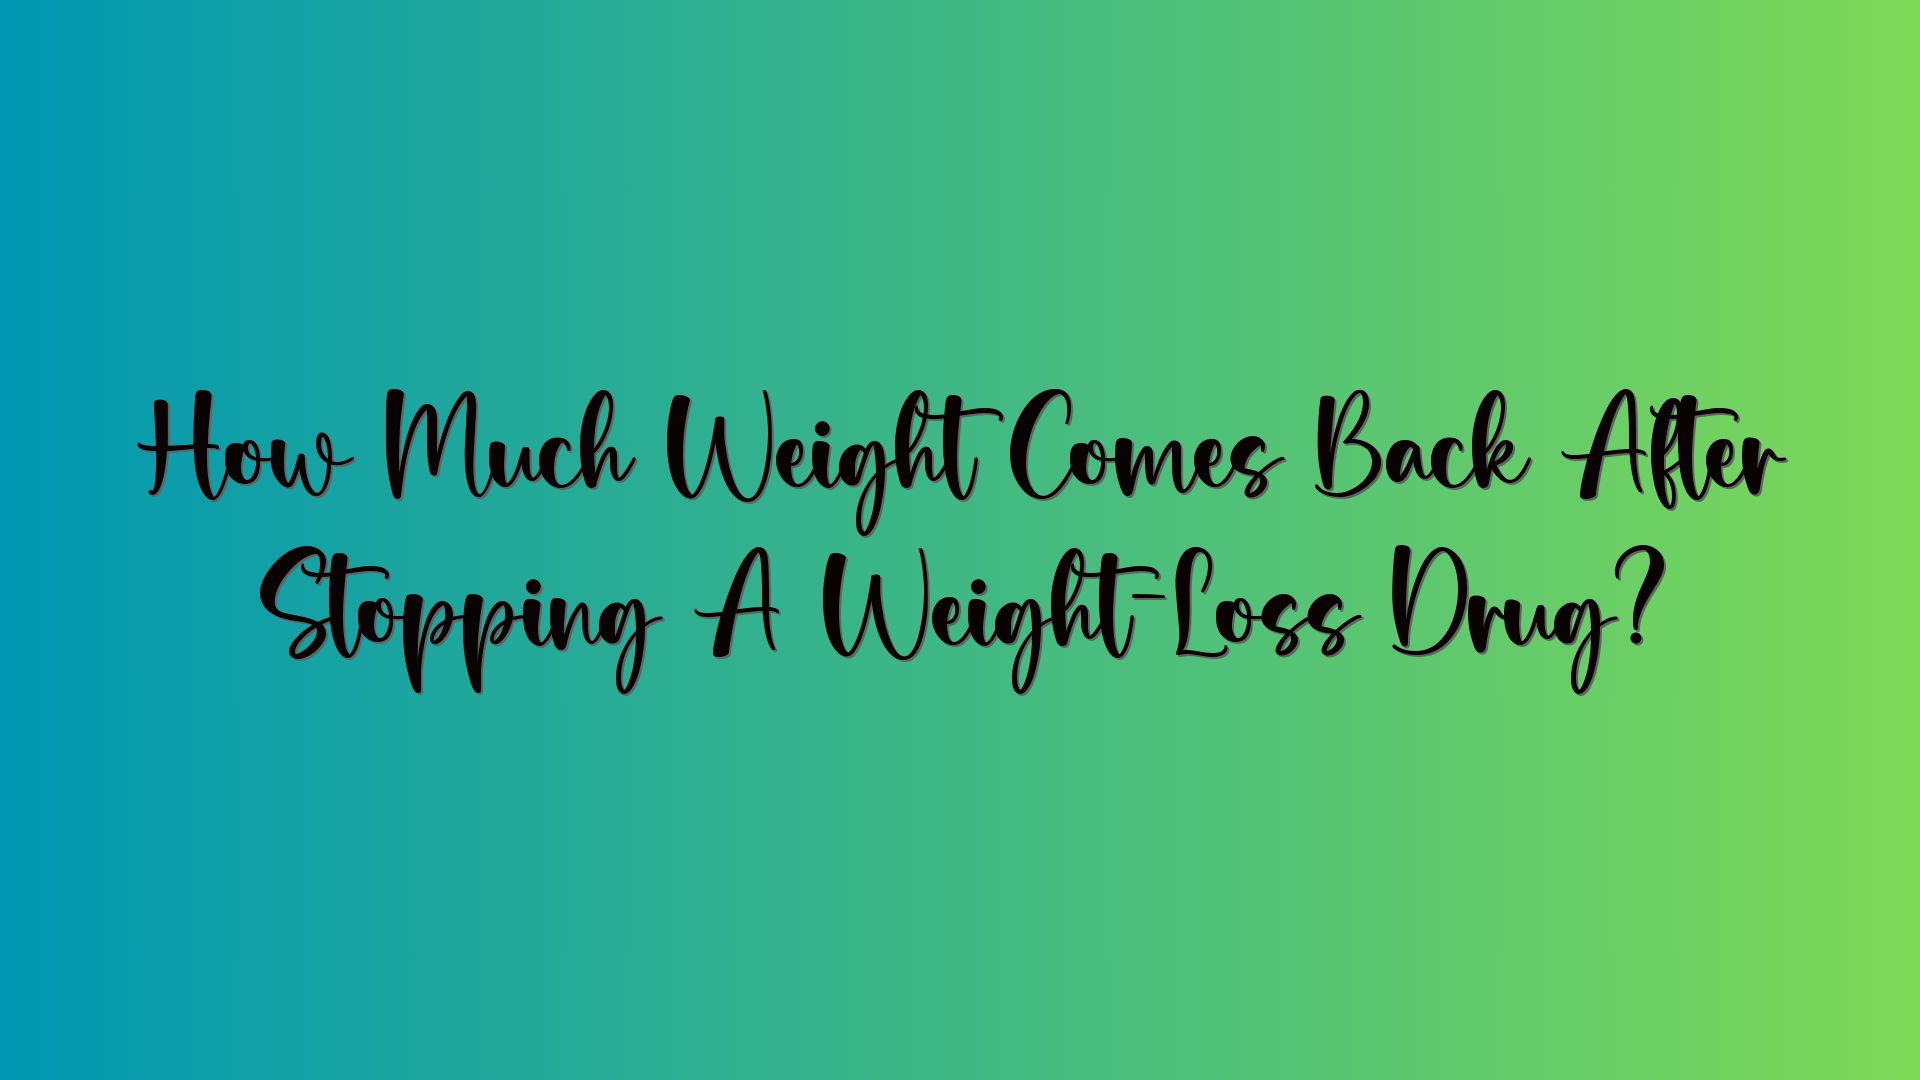 How Much Weight Comes Back After Stopping A Weight-Loss Drug?